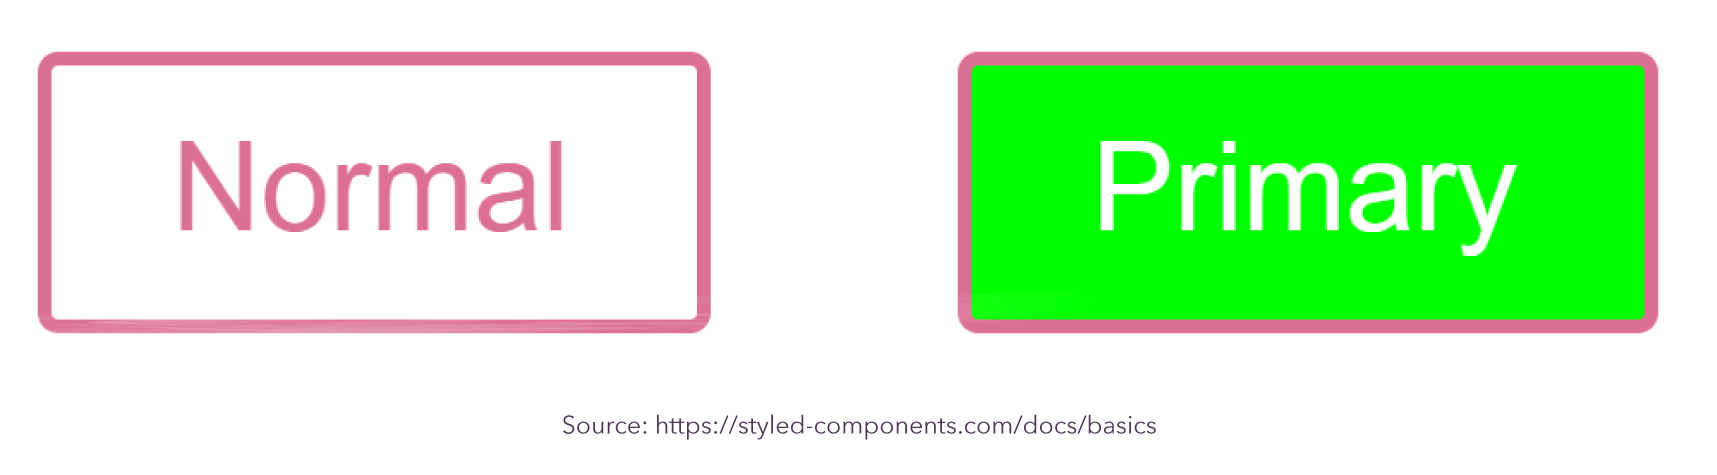 6 Ways Styled-Components Could Benefit Your Next Application